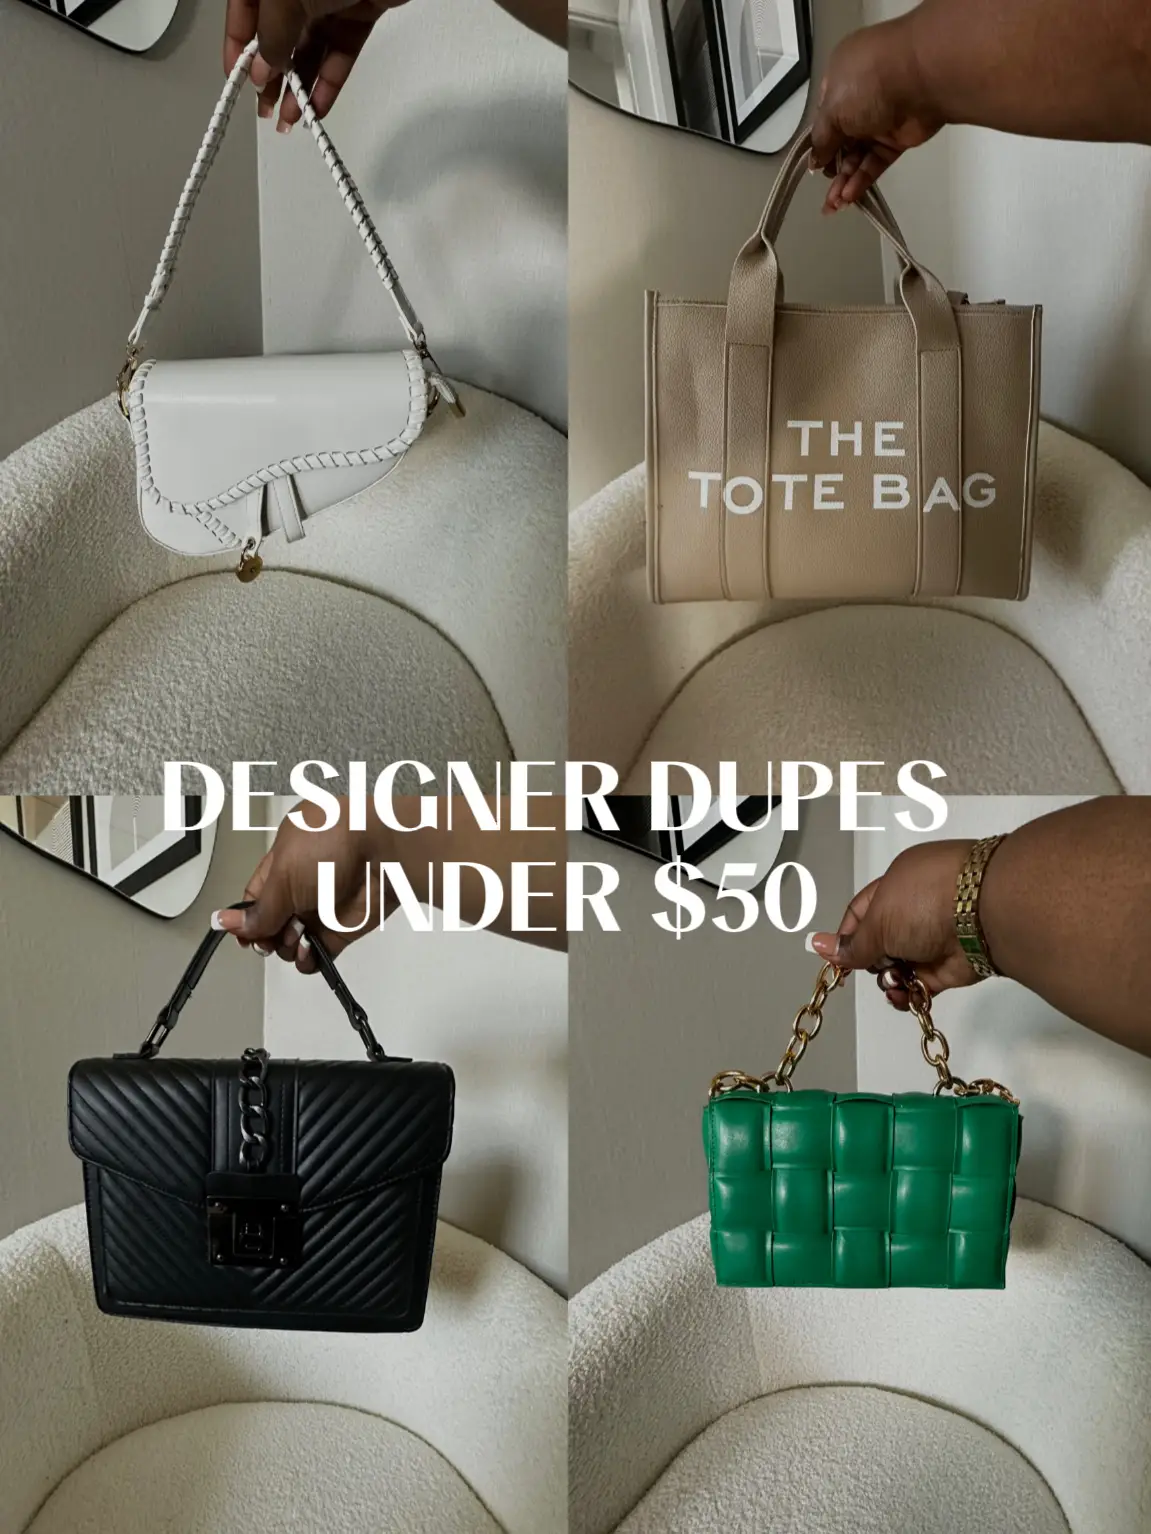 Designer Dupes Under $50, Gallery posted by Brianna